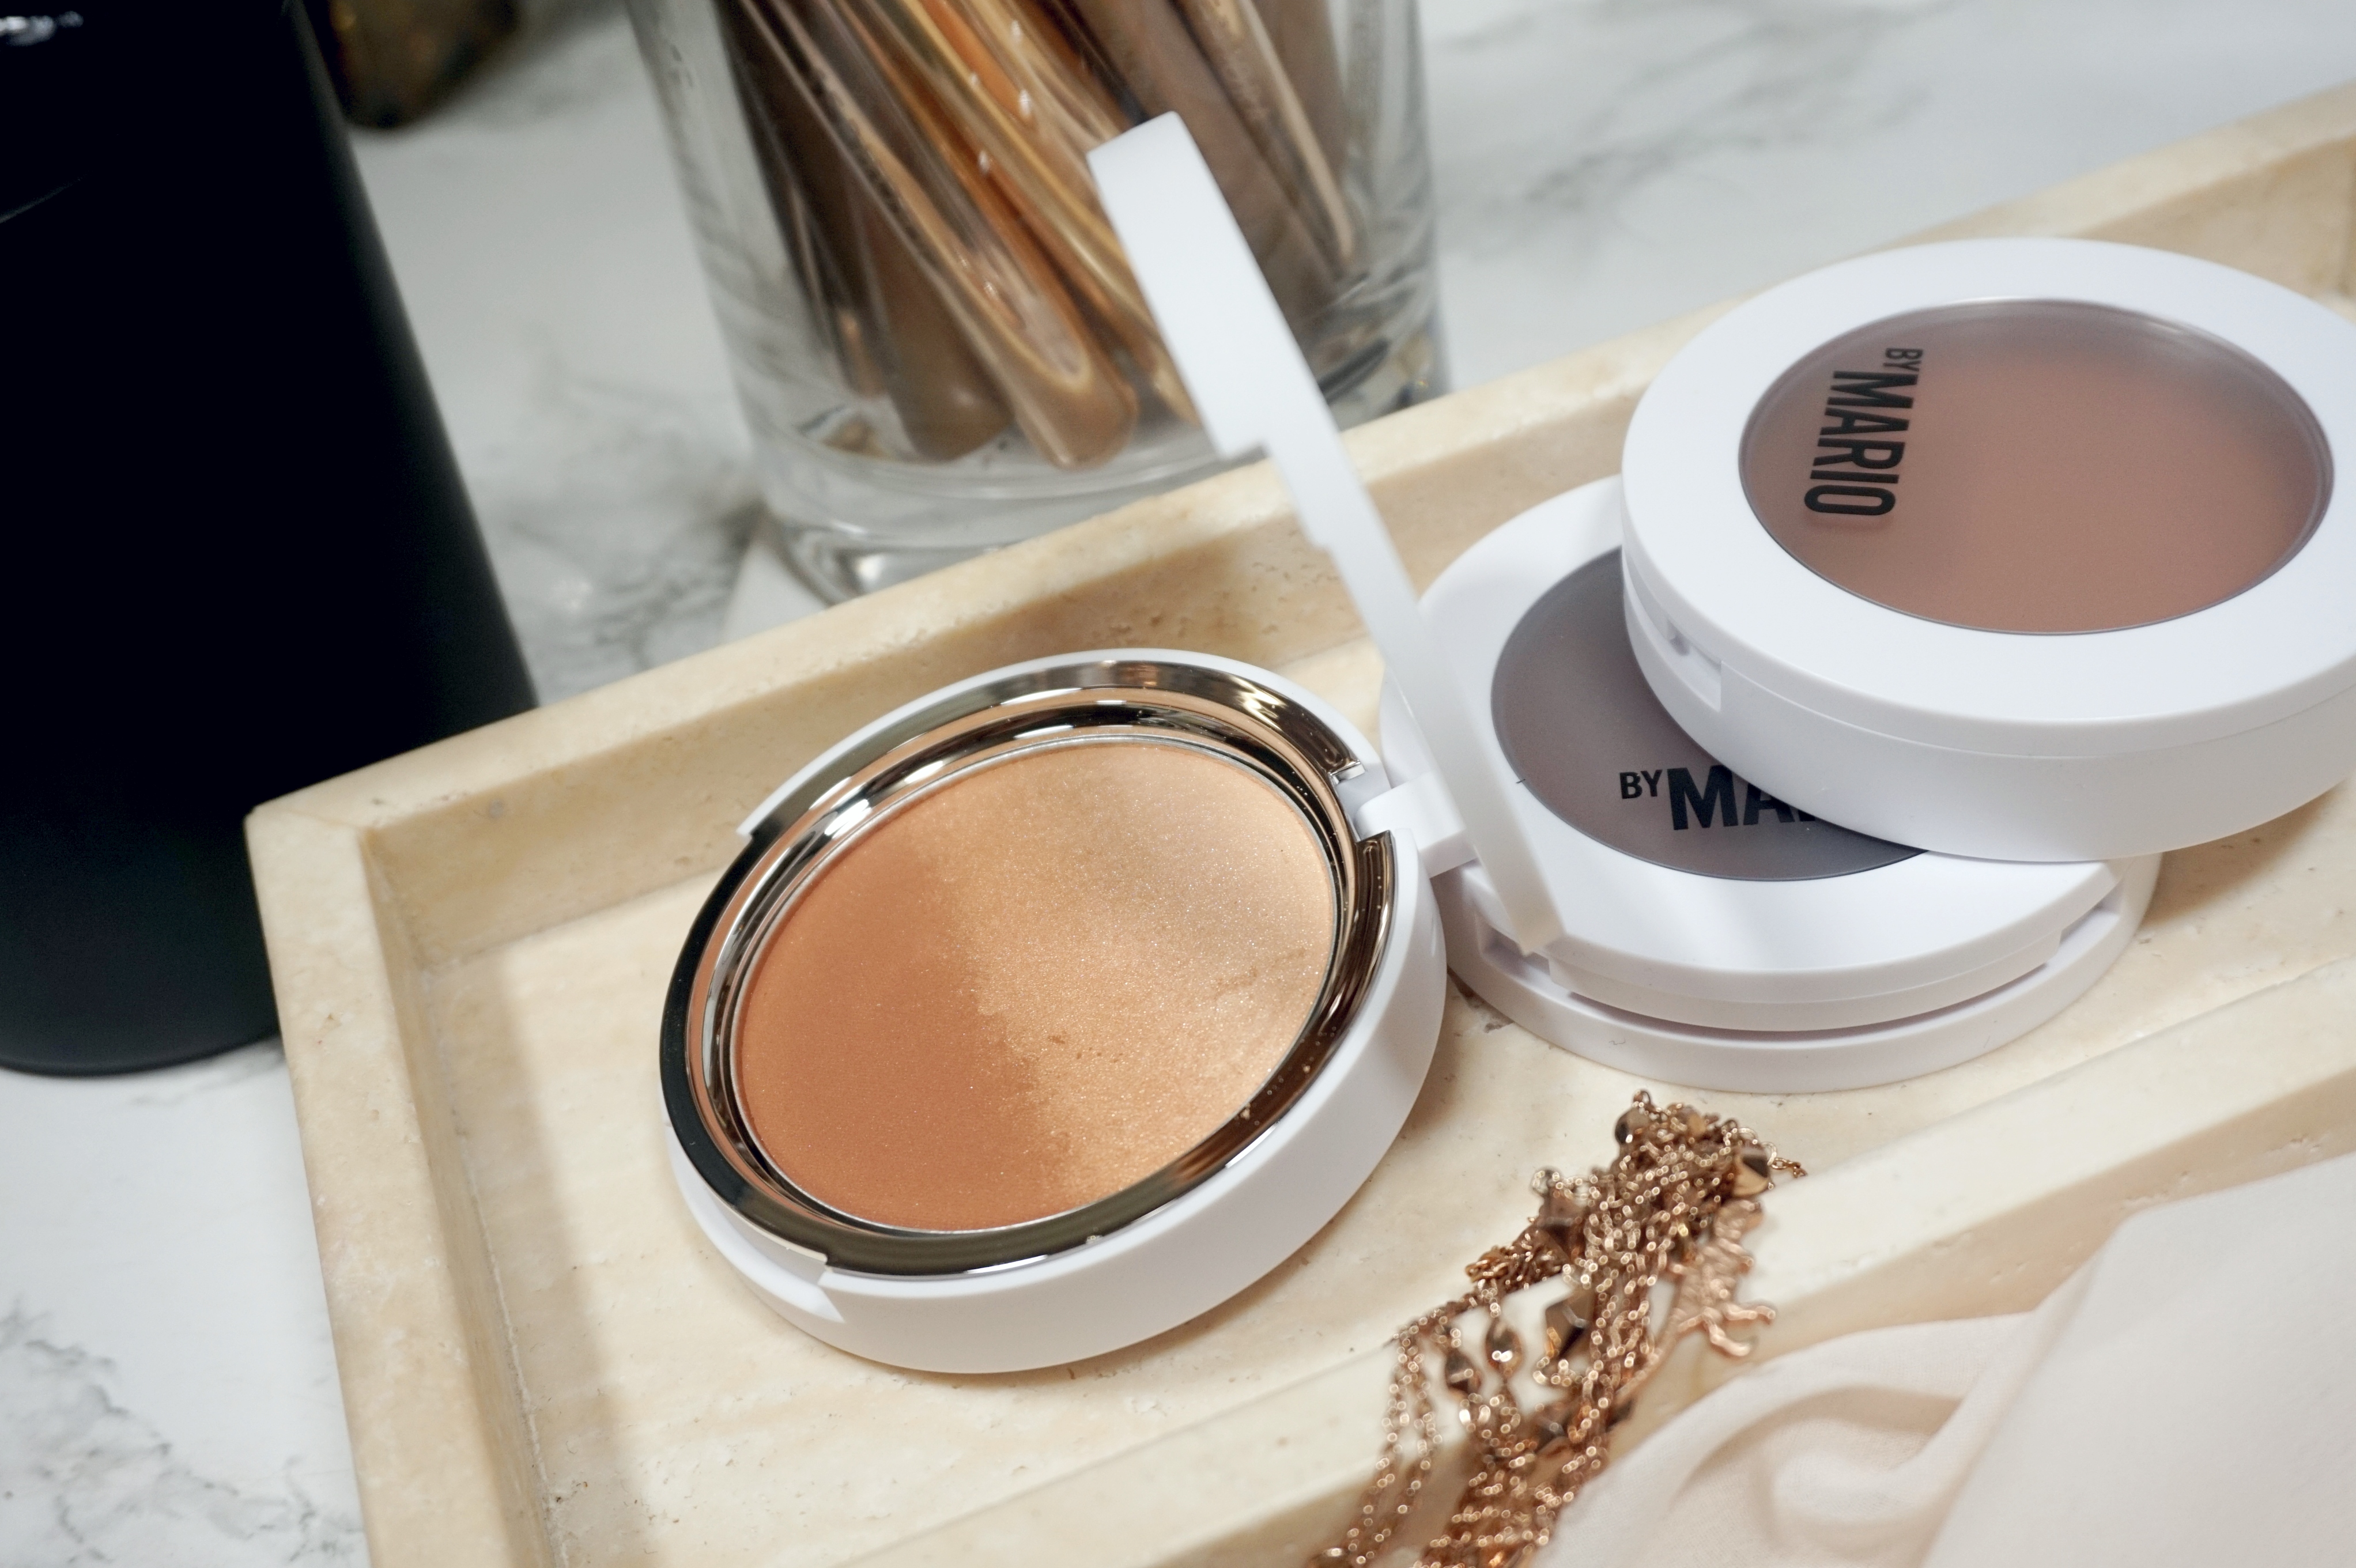 Makeup By Mario SoftSculpt Transforming Skin Perfector Review and Swatches